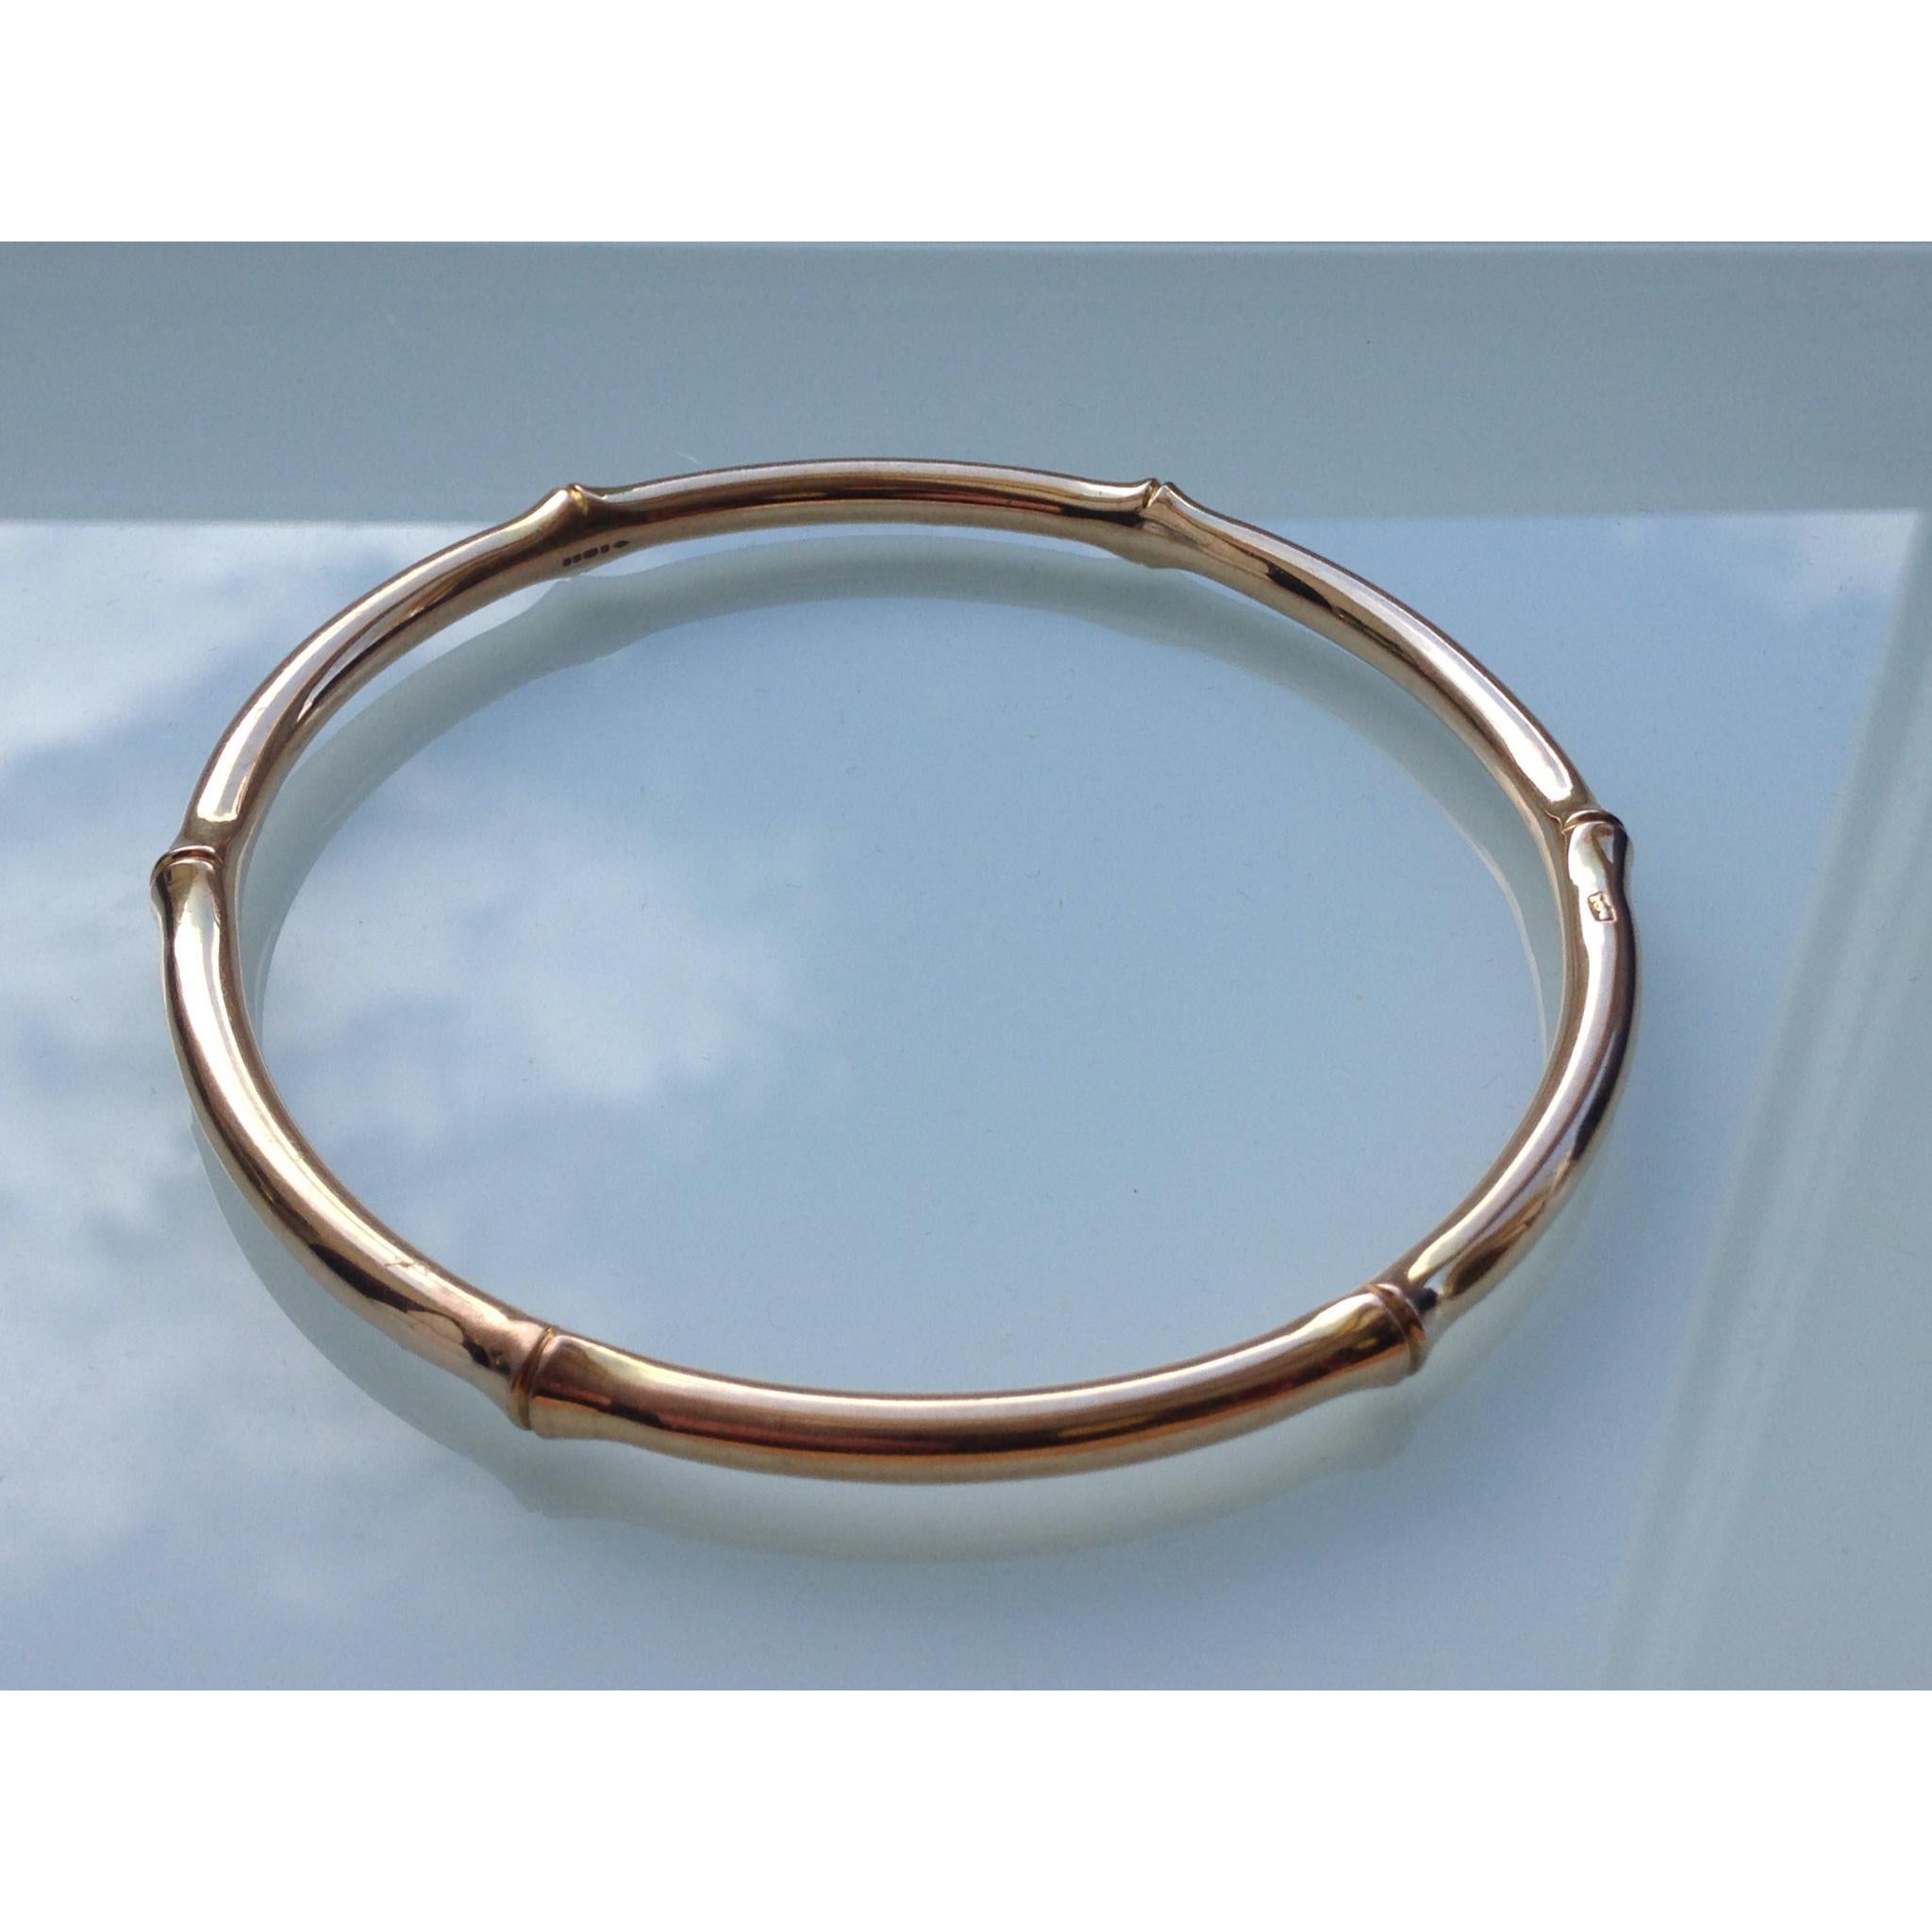 15ct 625 Antique Rose Gold Bamboo Design Bangle

Rare Large Sized Hollow Bangle
Dated 1880s
A Beautiful  simplistic very modern timeless designed antique bangle
Suitable for a Woman or Gentleman 
Fully Hallmarked in 2017 by London Jeweller